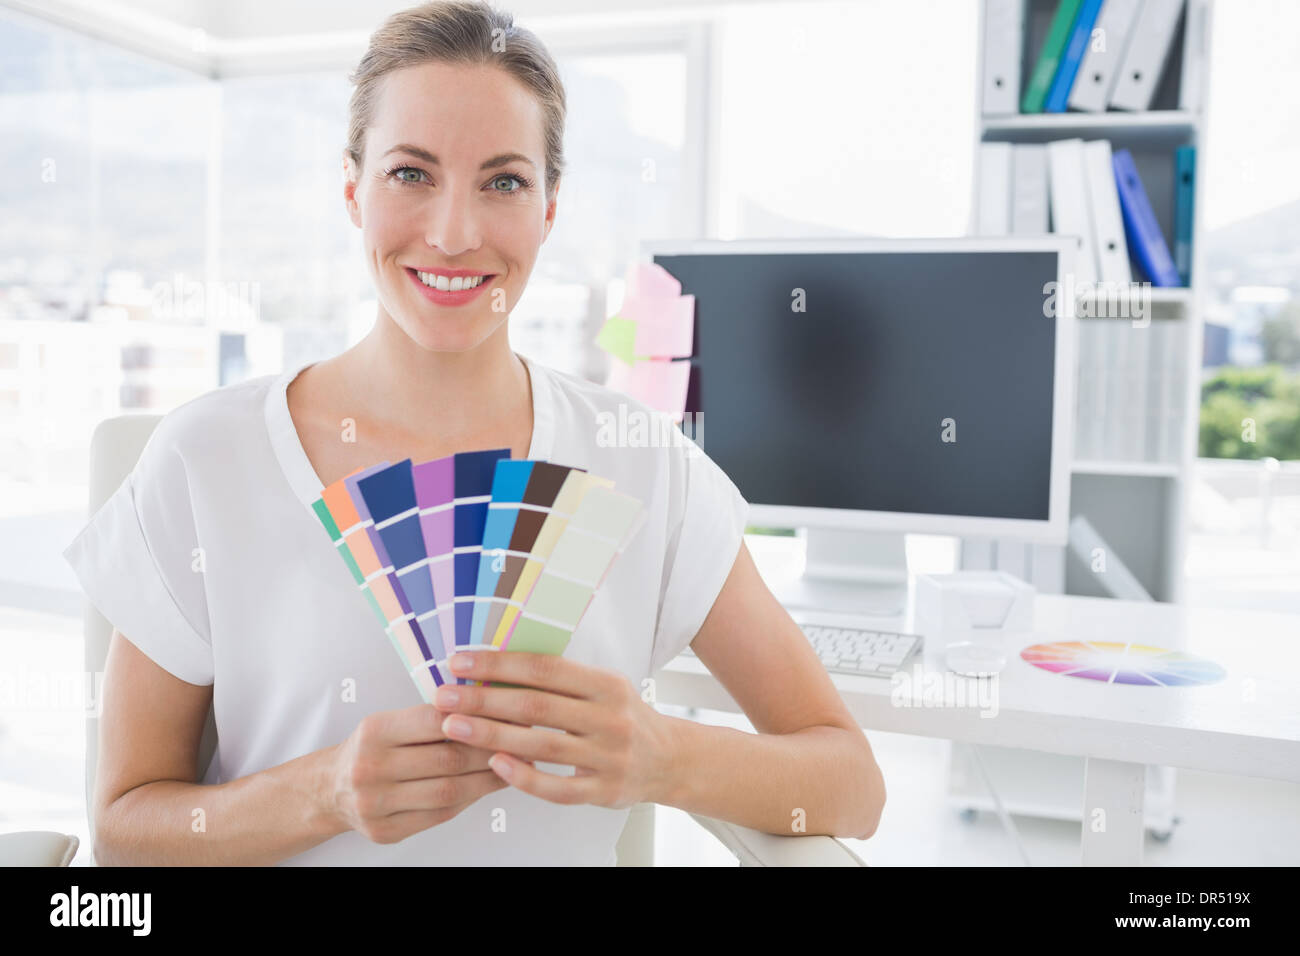 Portrait of a photo editor holding colors Stock Photo